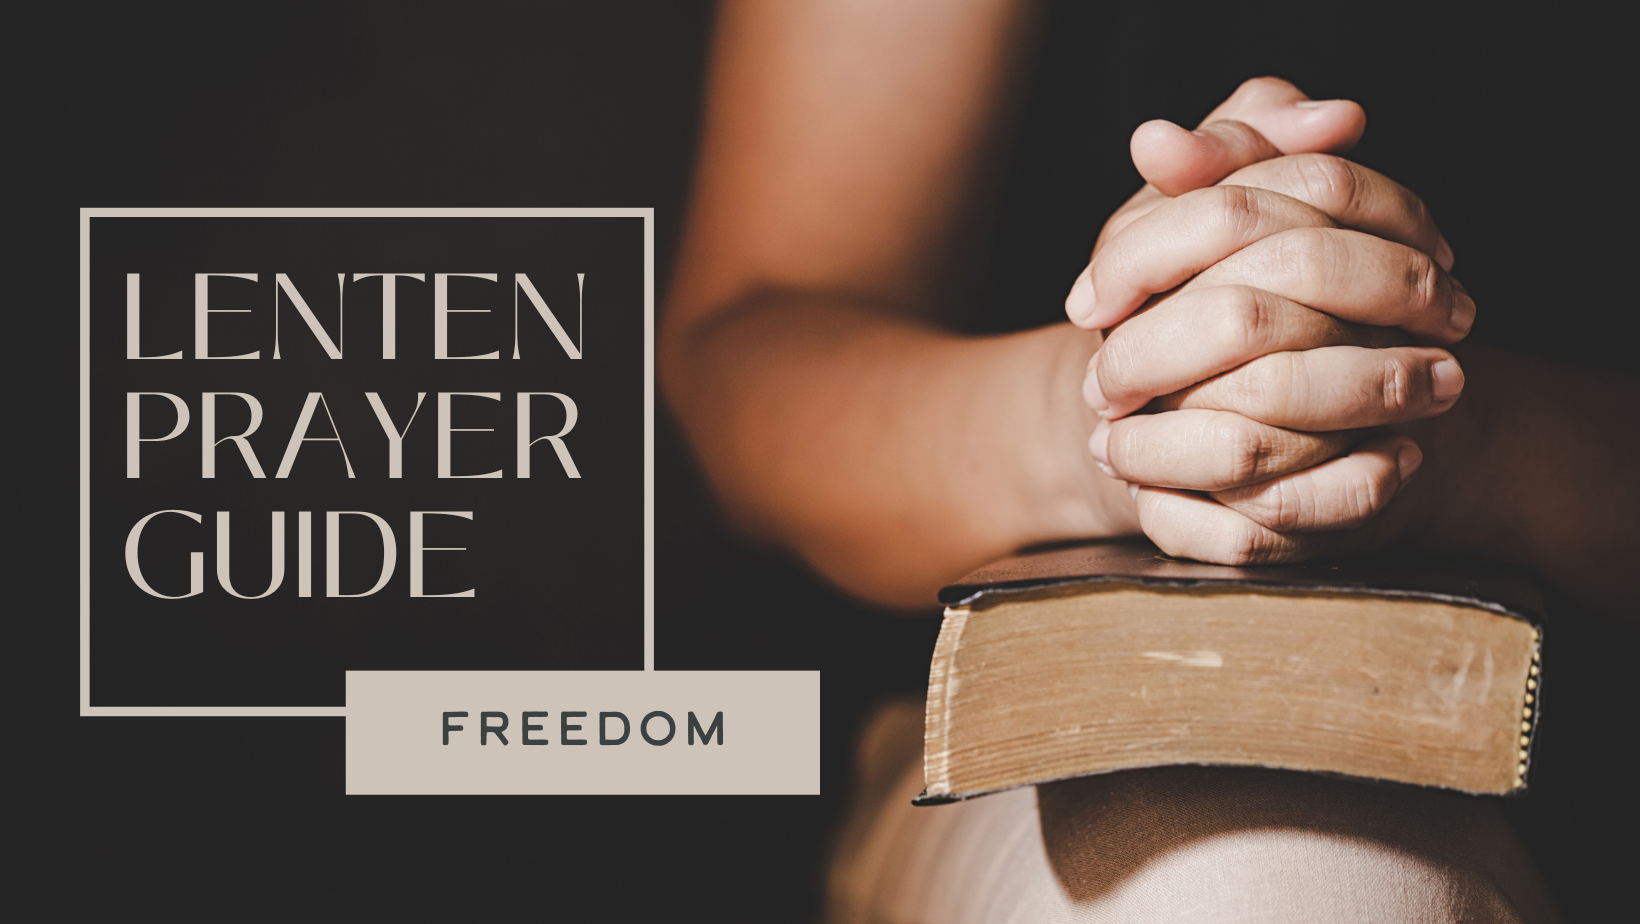 You are currently viewing Lenten Prayer Guide: Freedom